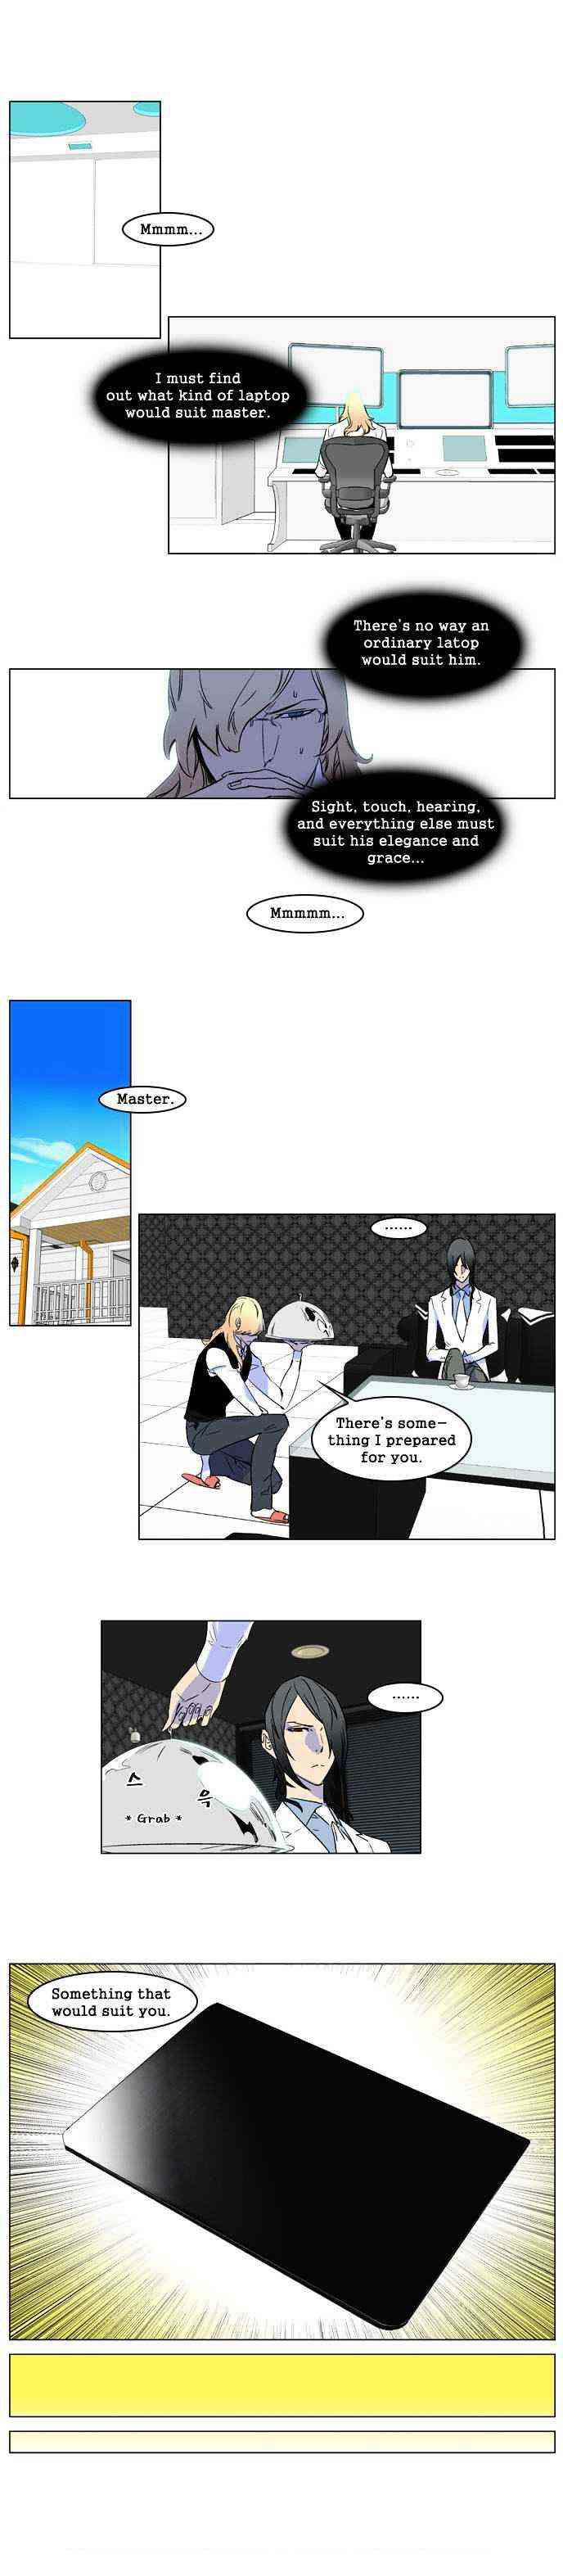 Noblesse Chapter 175.5 _ Attention Please. Note 10. Suitabl page 2